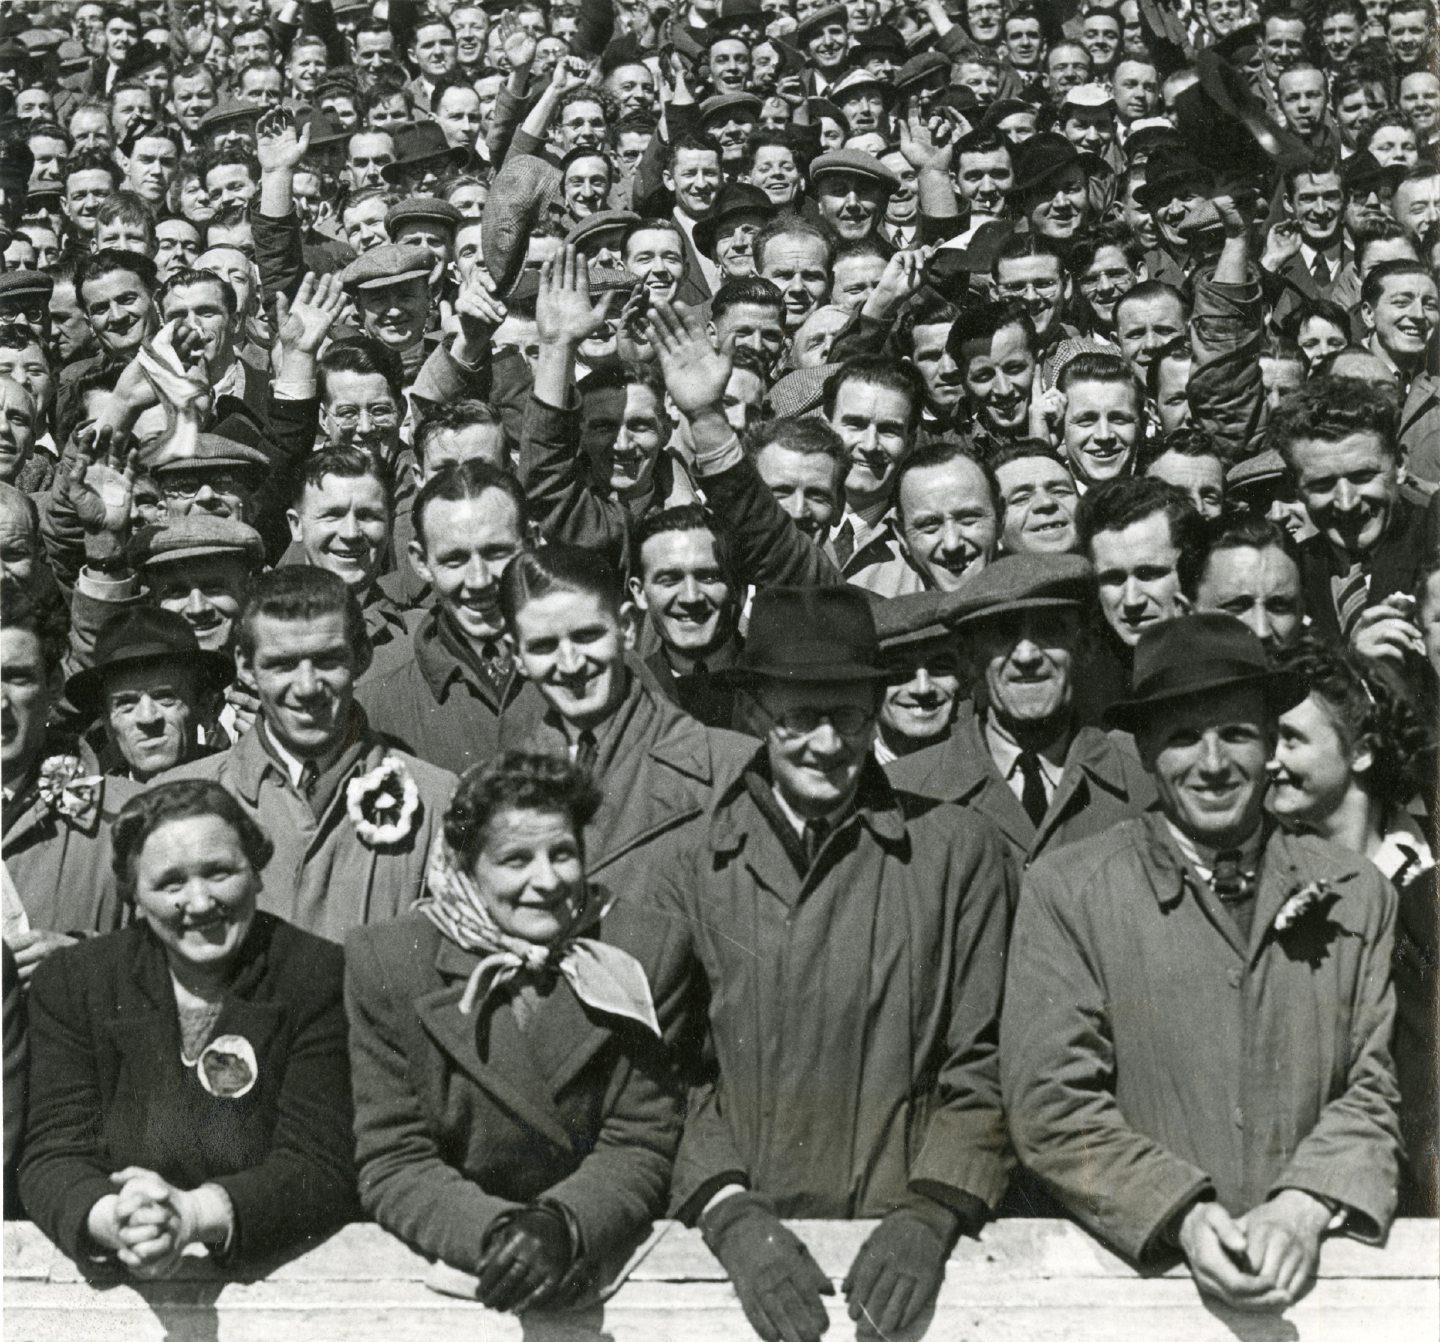 Some of the Dons fans at Hampden for the 1947 Scottish Cup final. More than 80,000 people saw the game.